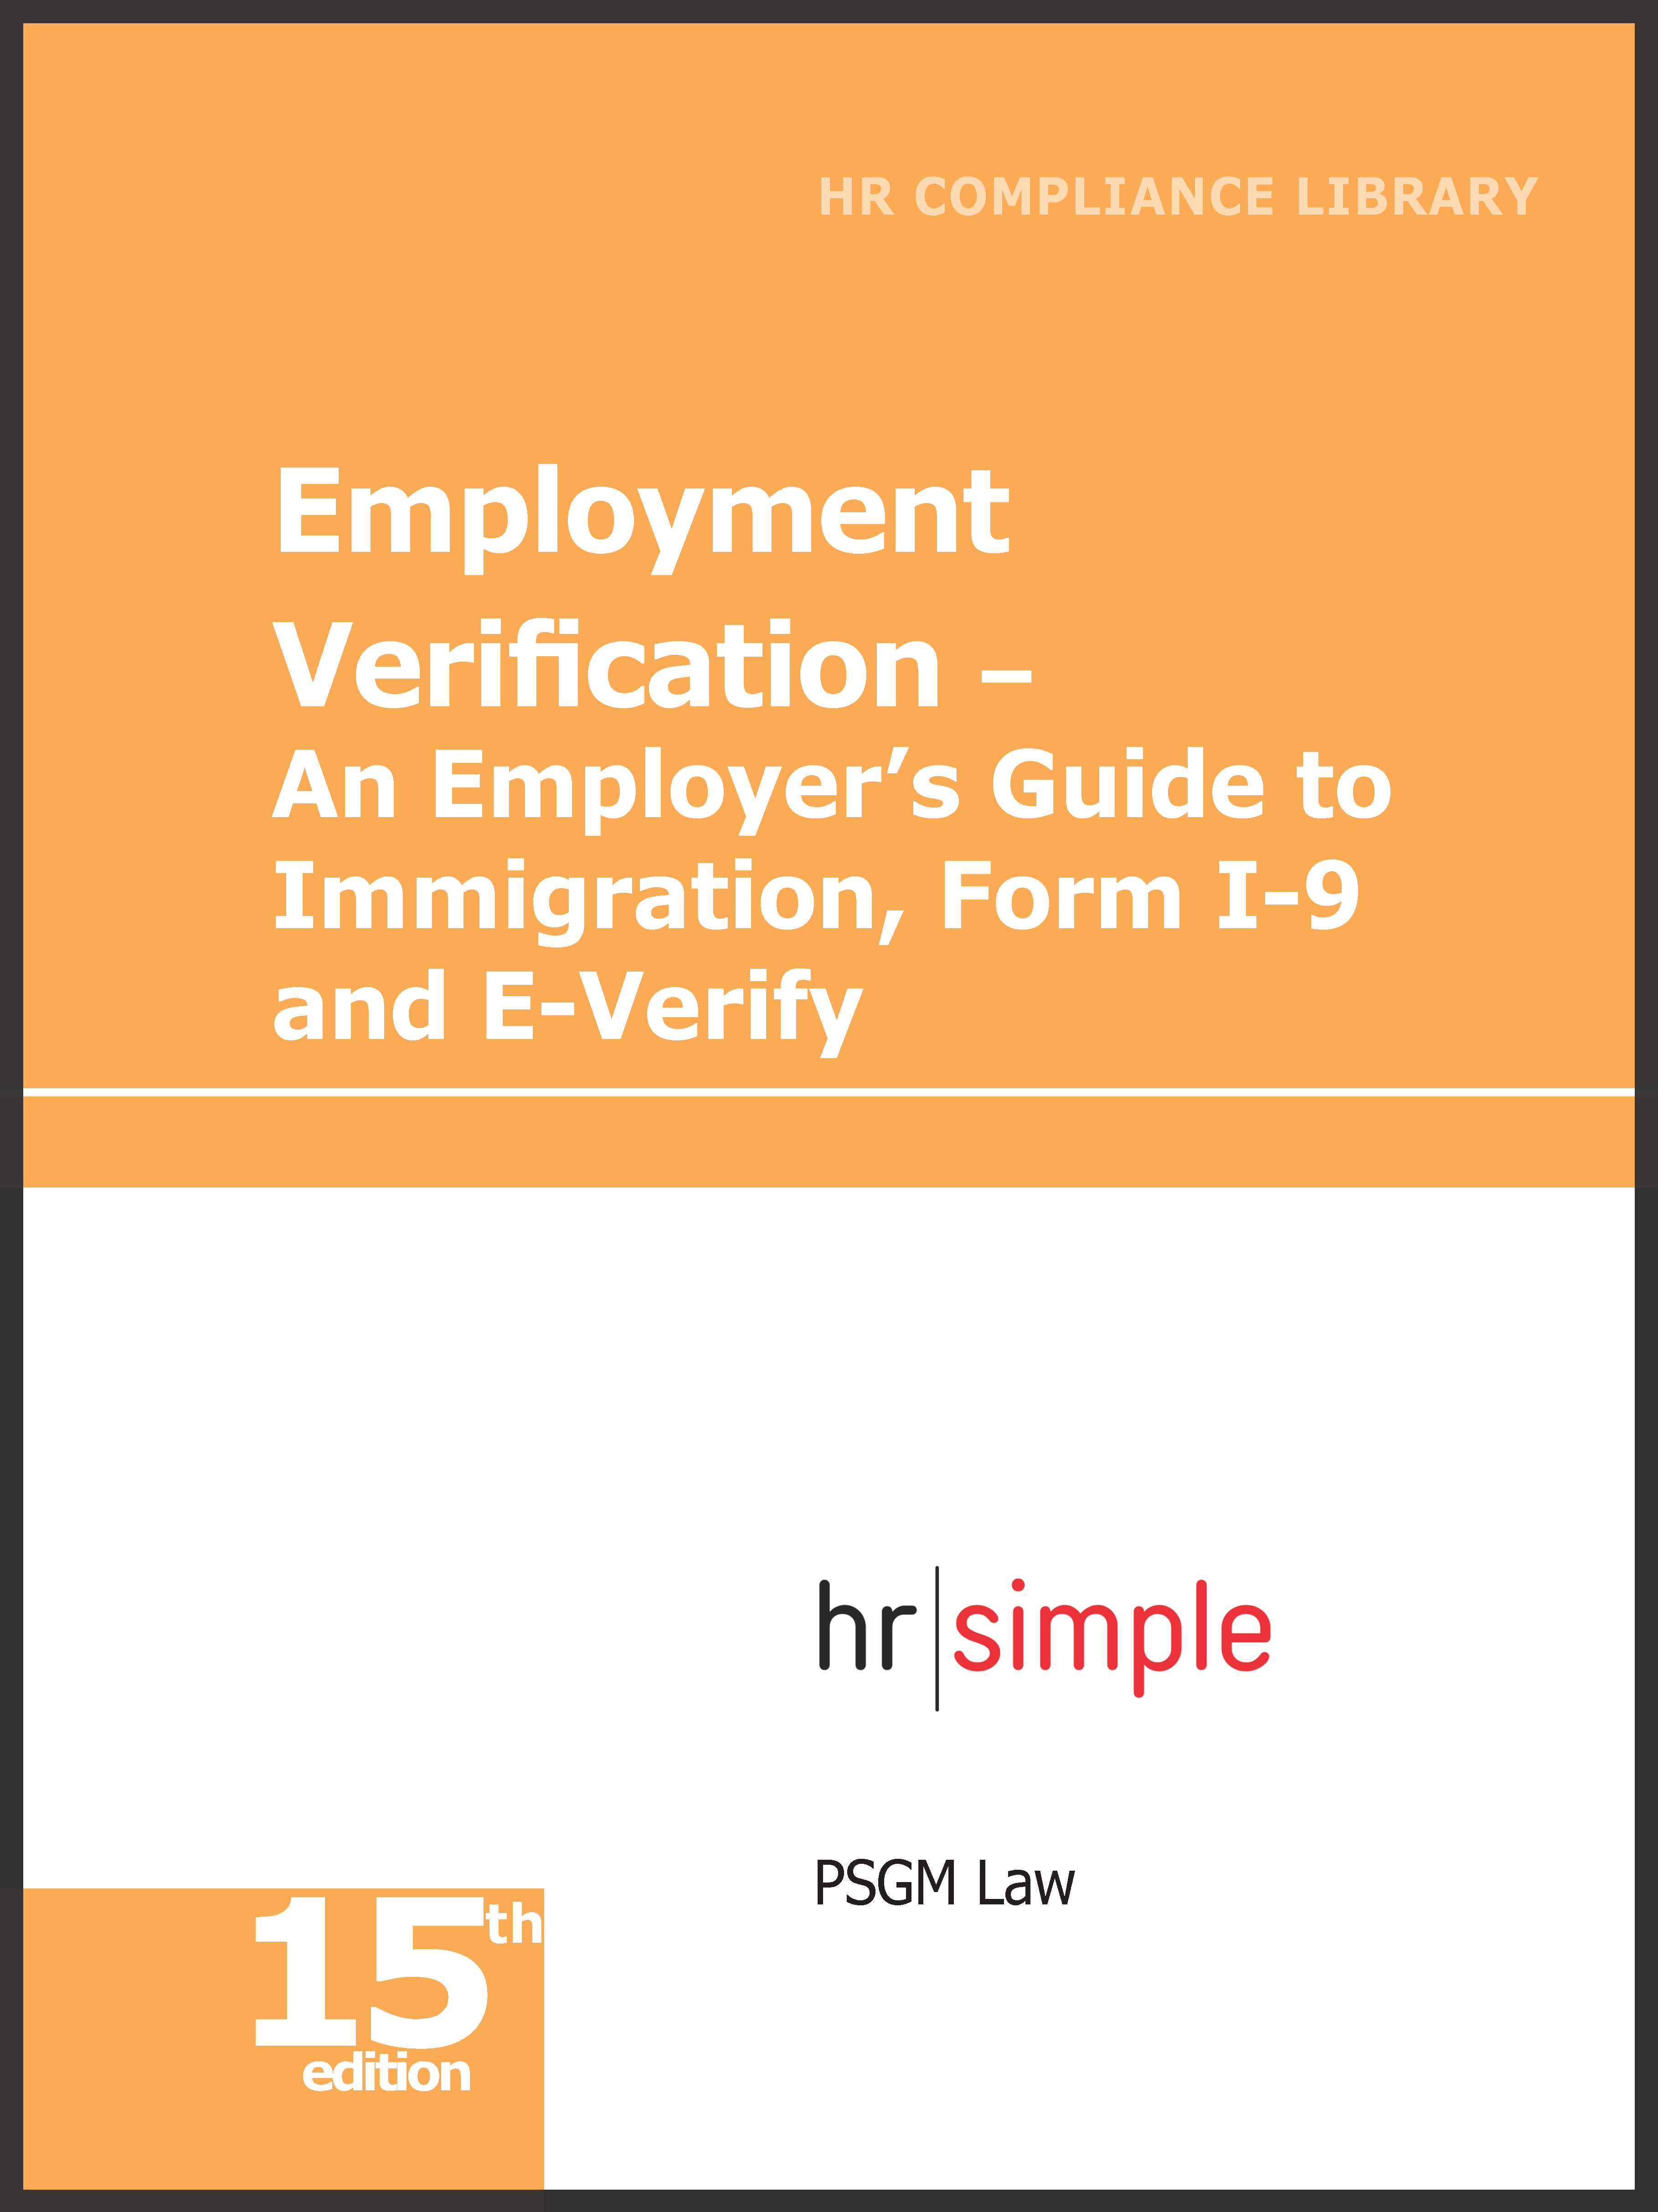 Employment Verification: Immigration, Form I-9, and E-Verify employment law image, remote work, labor laws, employment laws, right to work, order of protection, minimum wage